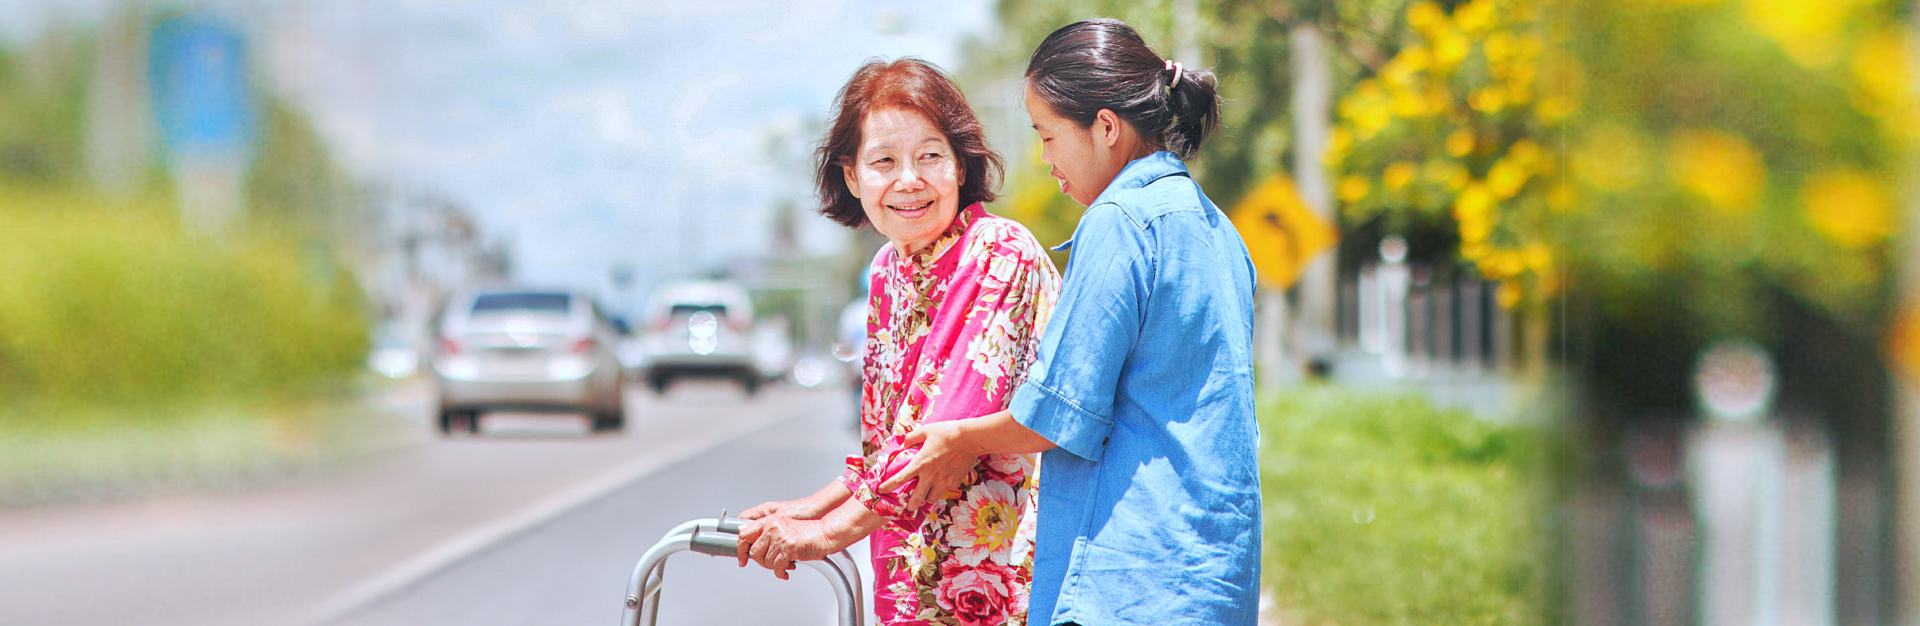 caregiver assisting senior woman in crossing the street